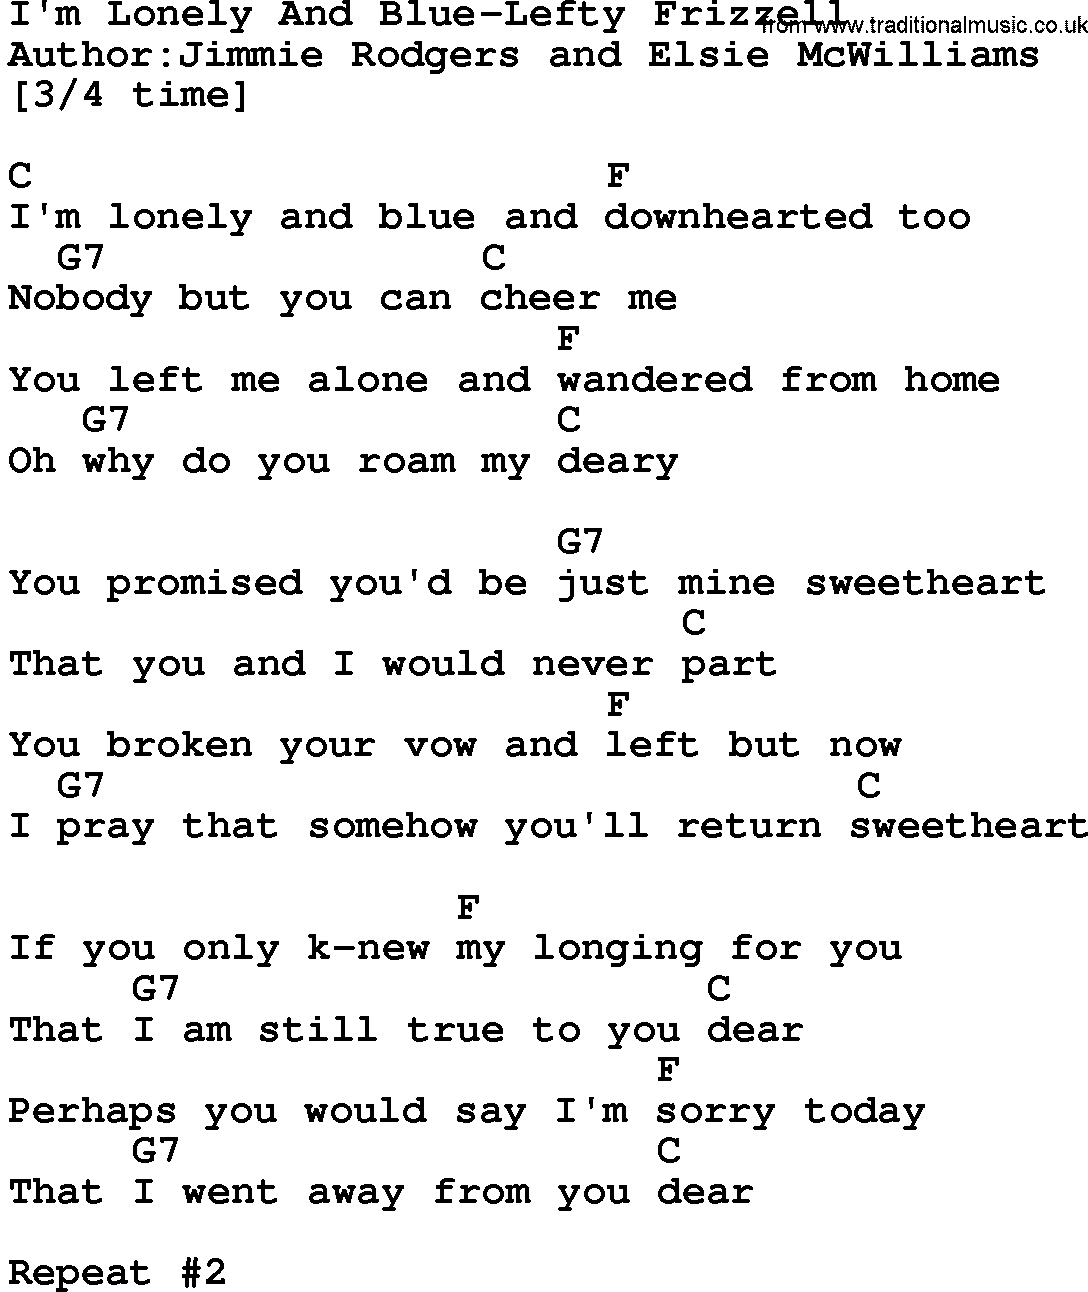 Country music song: I'm Lonely And Blue-Lefty Frizzell lyrics and chords